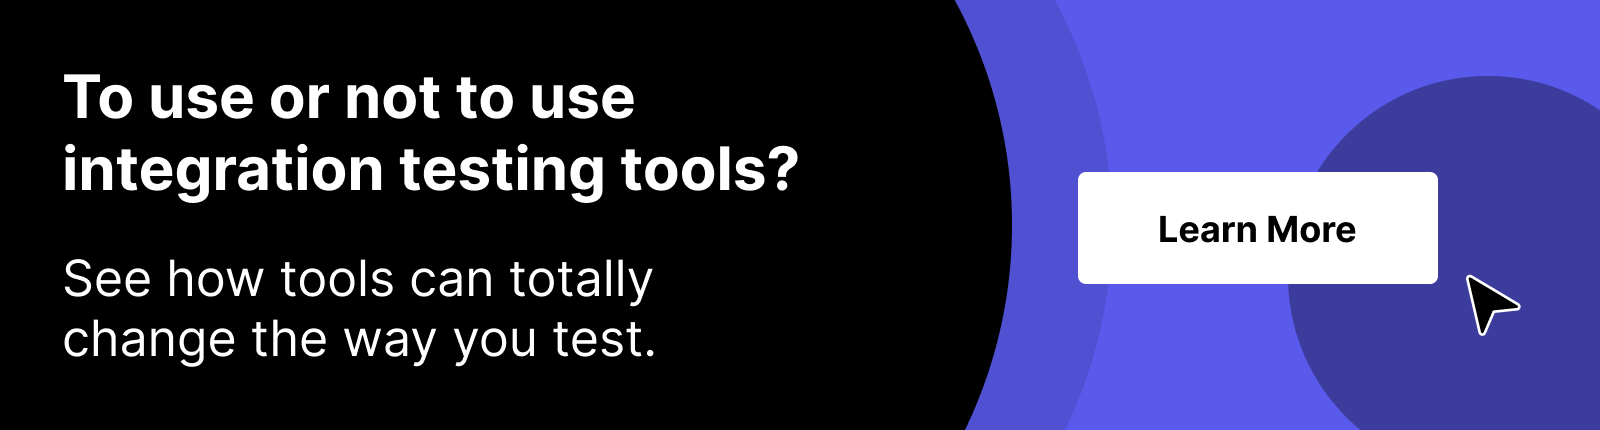 to use or not to use integration testing tools